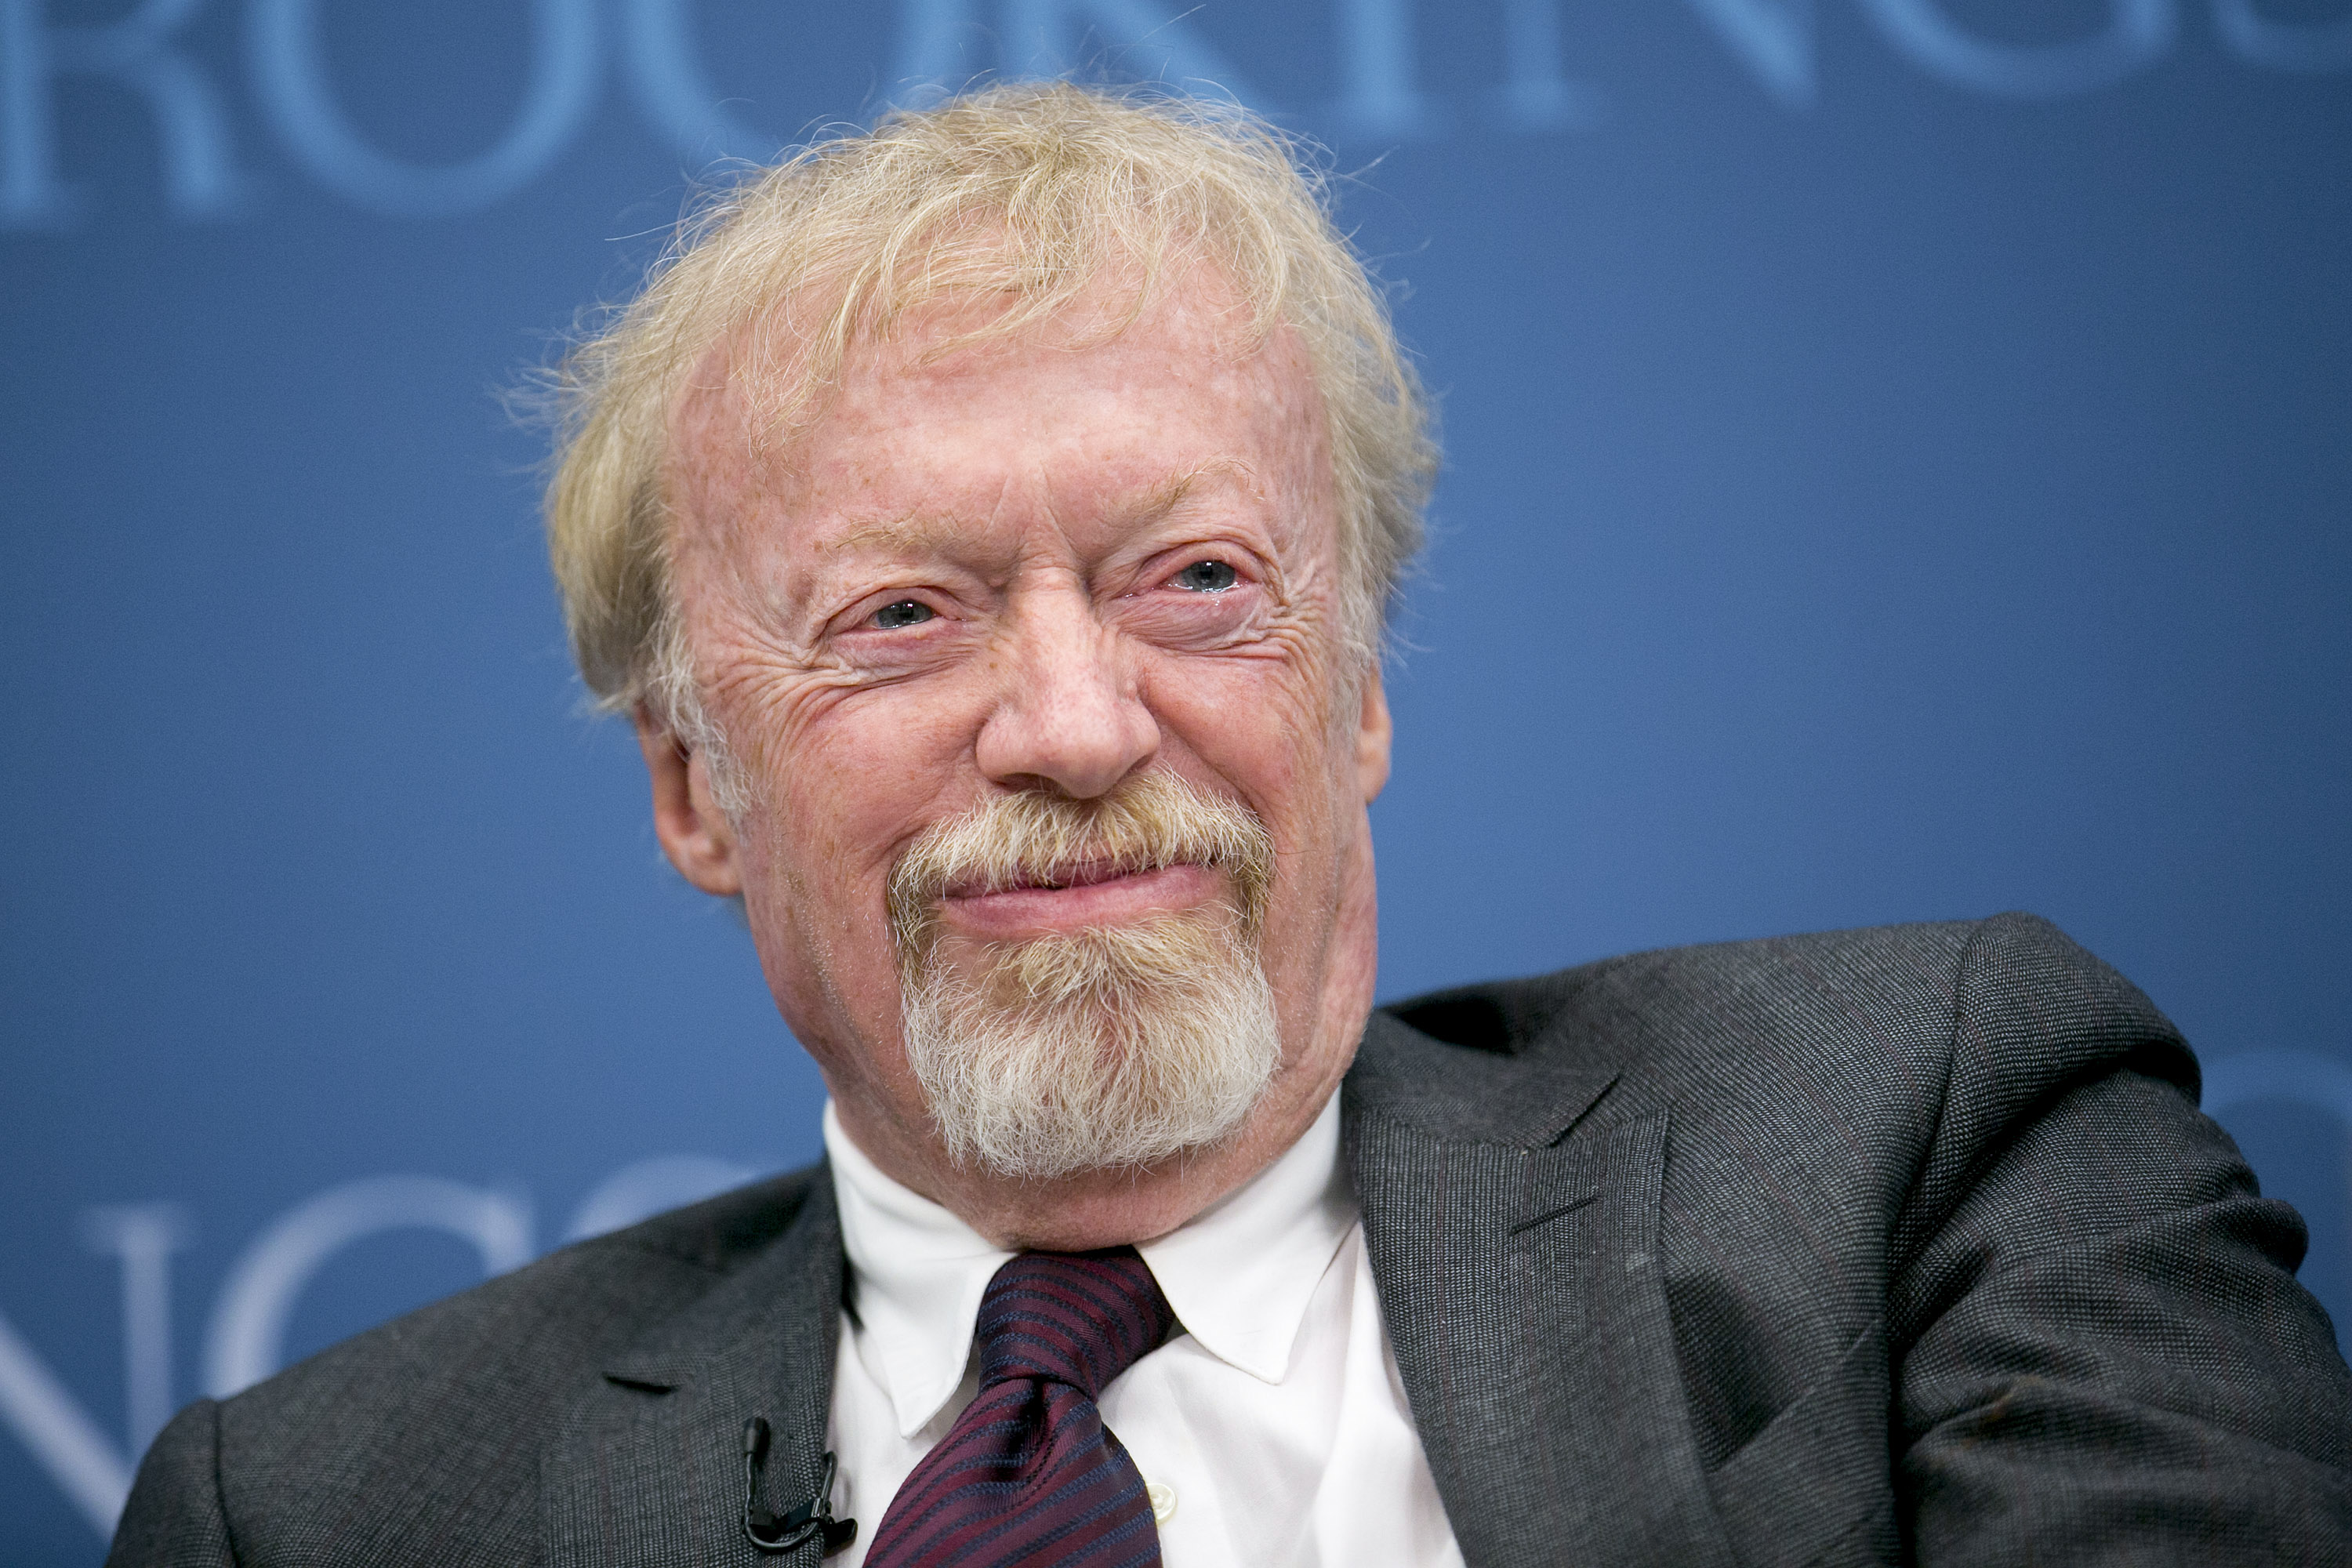 Phil Knight, chairman and co-founder of Nike Inc., laughs during a panel discussion at the Brookings Institution in Washington, D.C., U.S., on Tuesday, Jan. 15, 2013. (Andrew Harrer—Bloomberg/Getty Images)